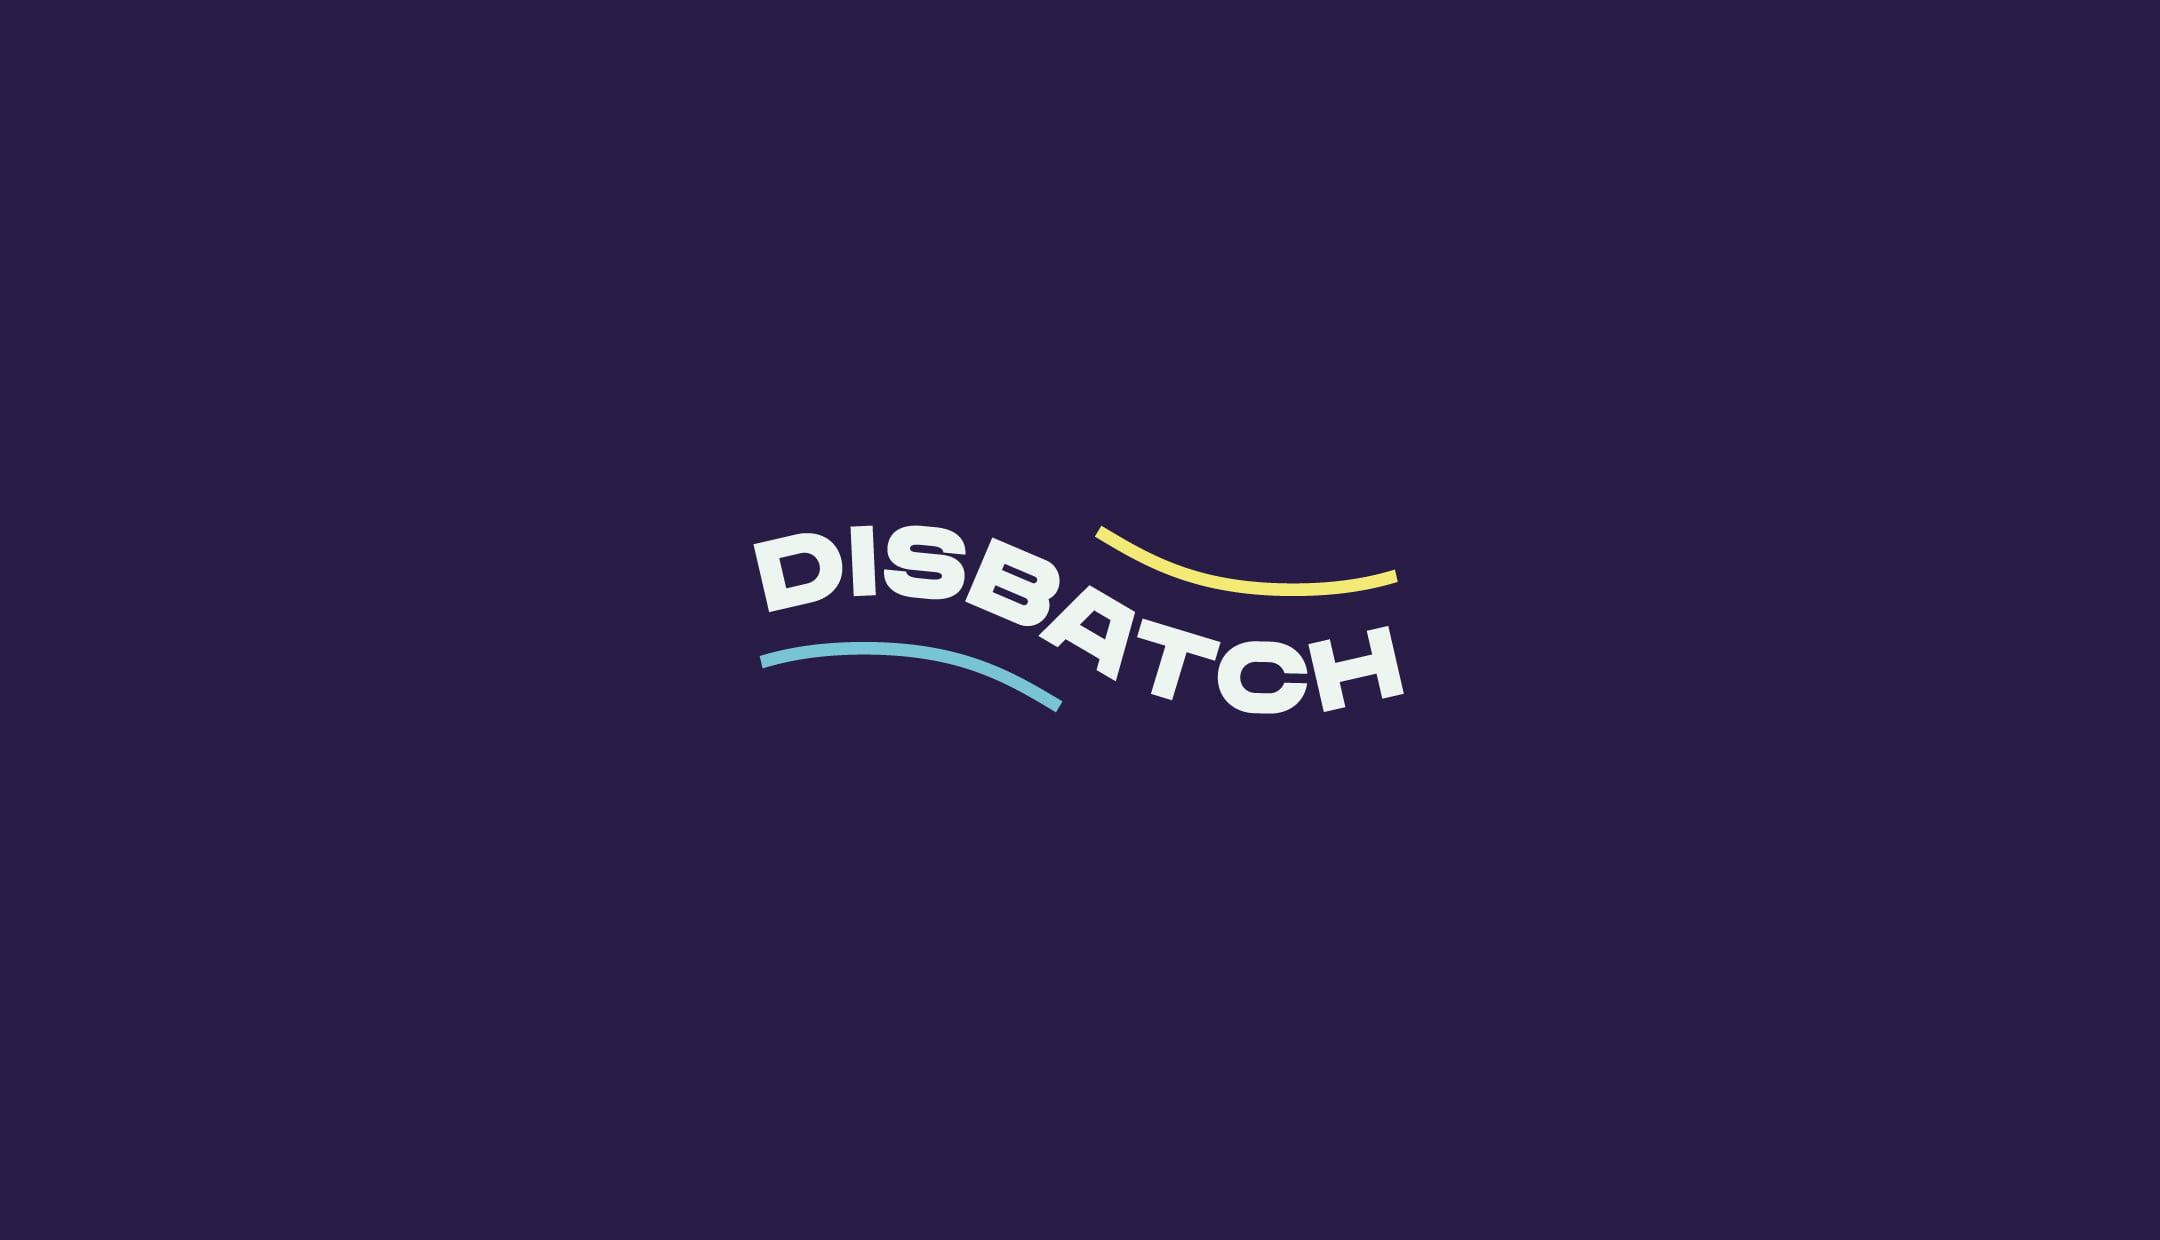 Disbatch logo design and feature image